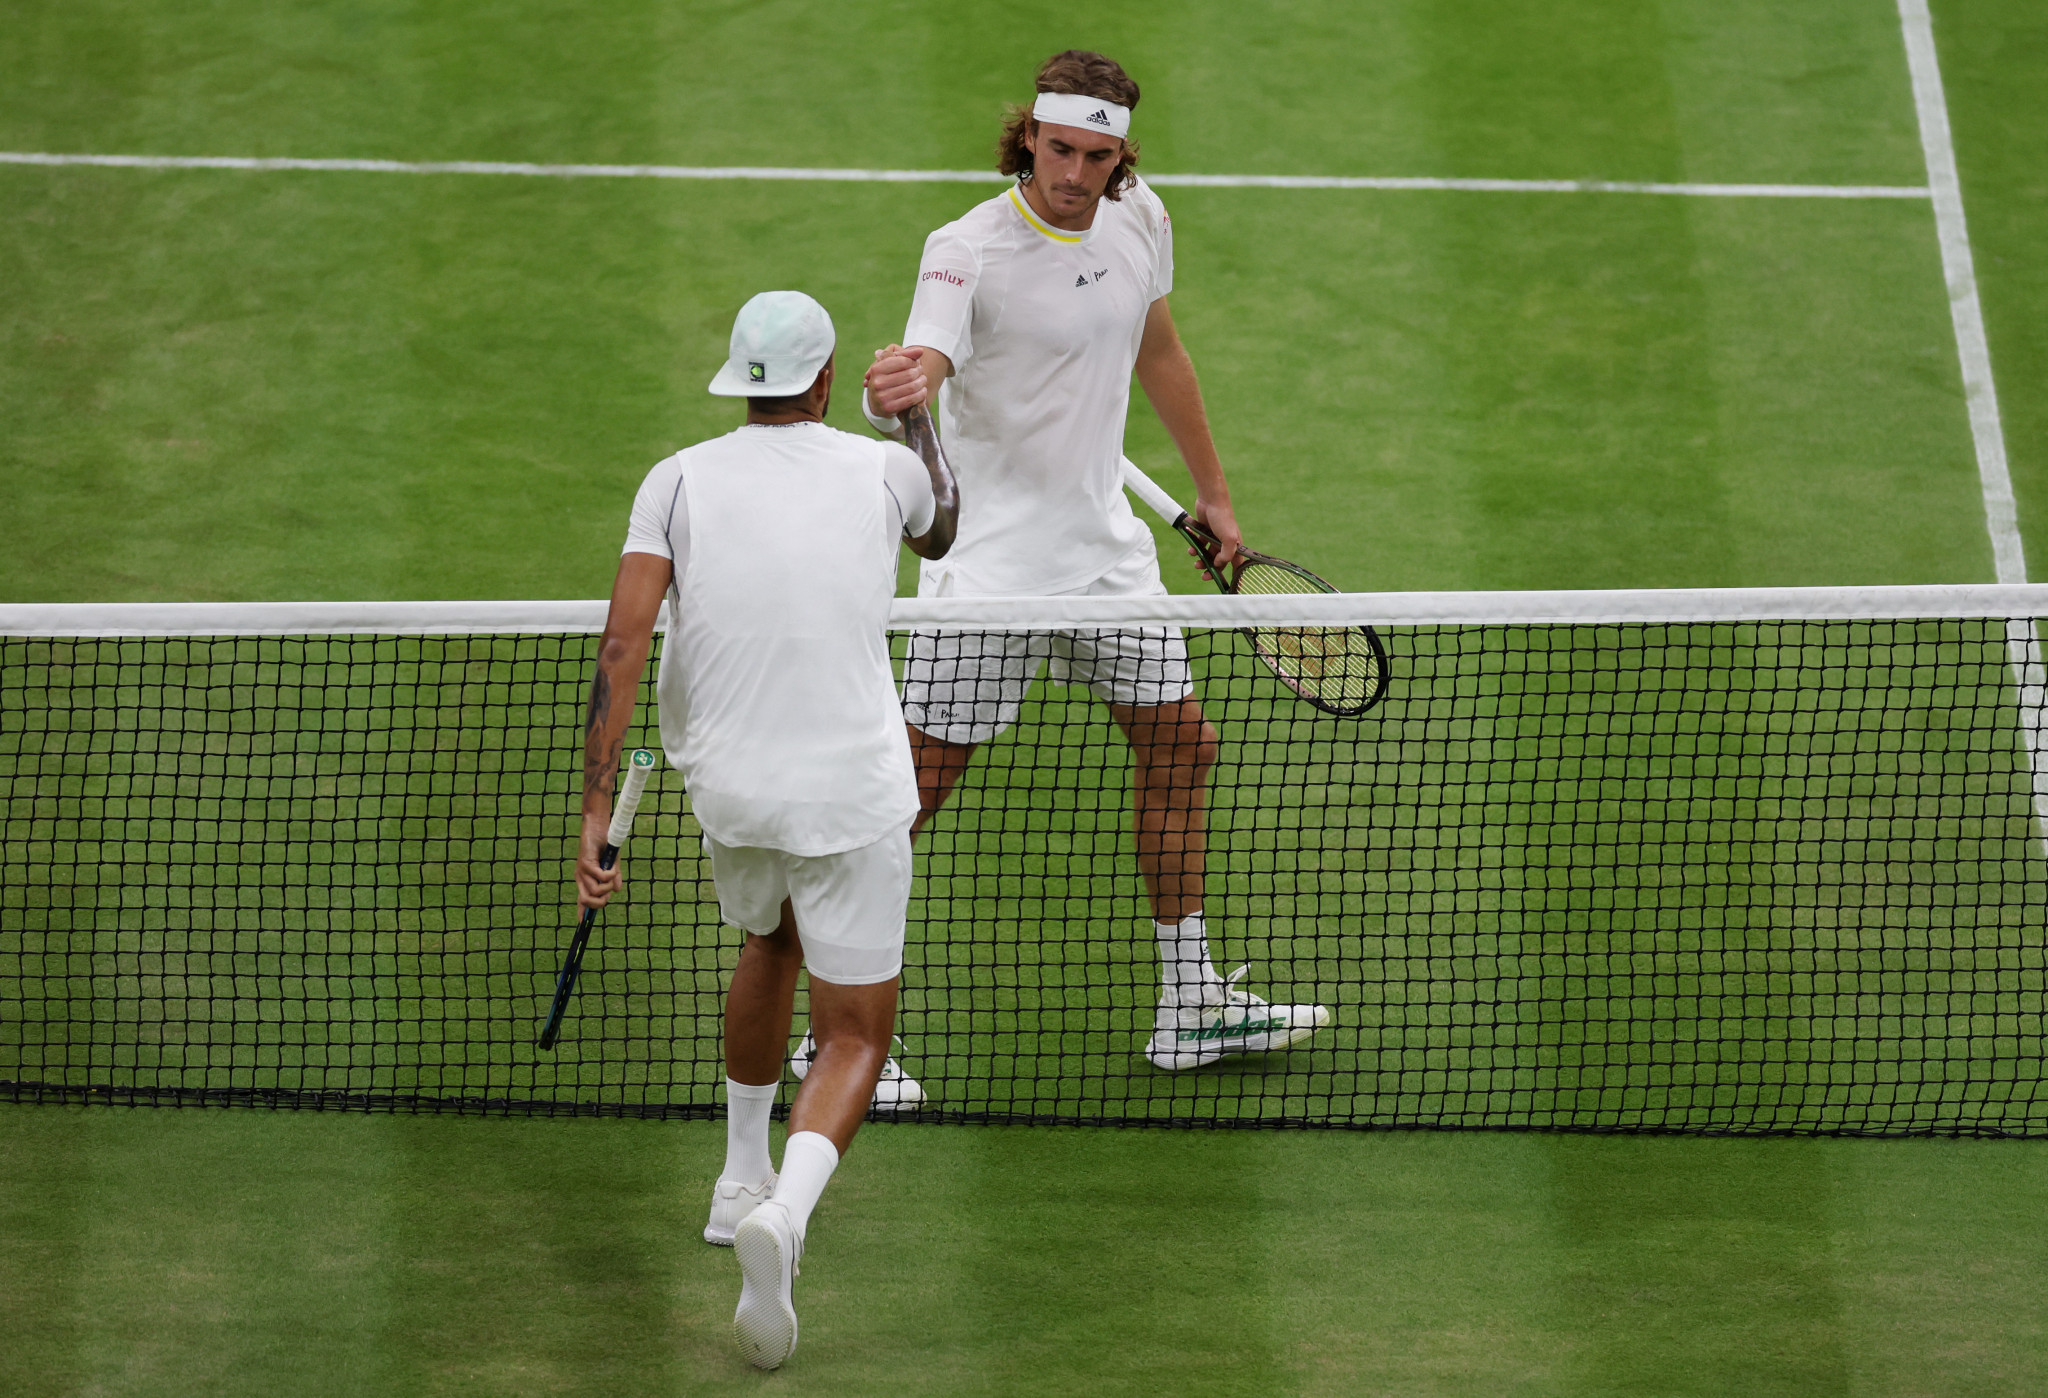 Stefanos Tsitsipas called Nick Kyrgios a "bully" after his match, extending a quick handshake before leaving the court ©Getty Images